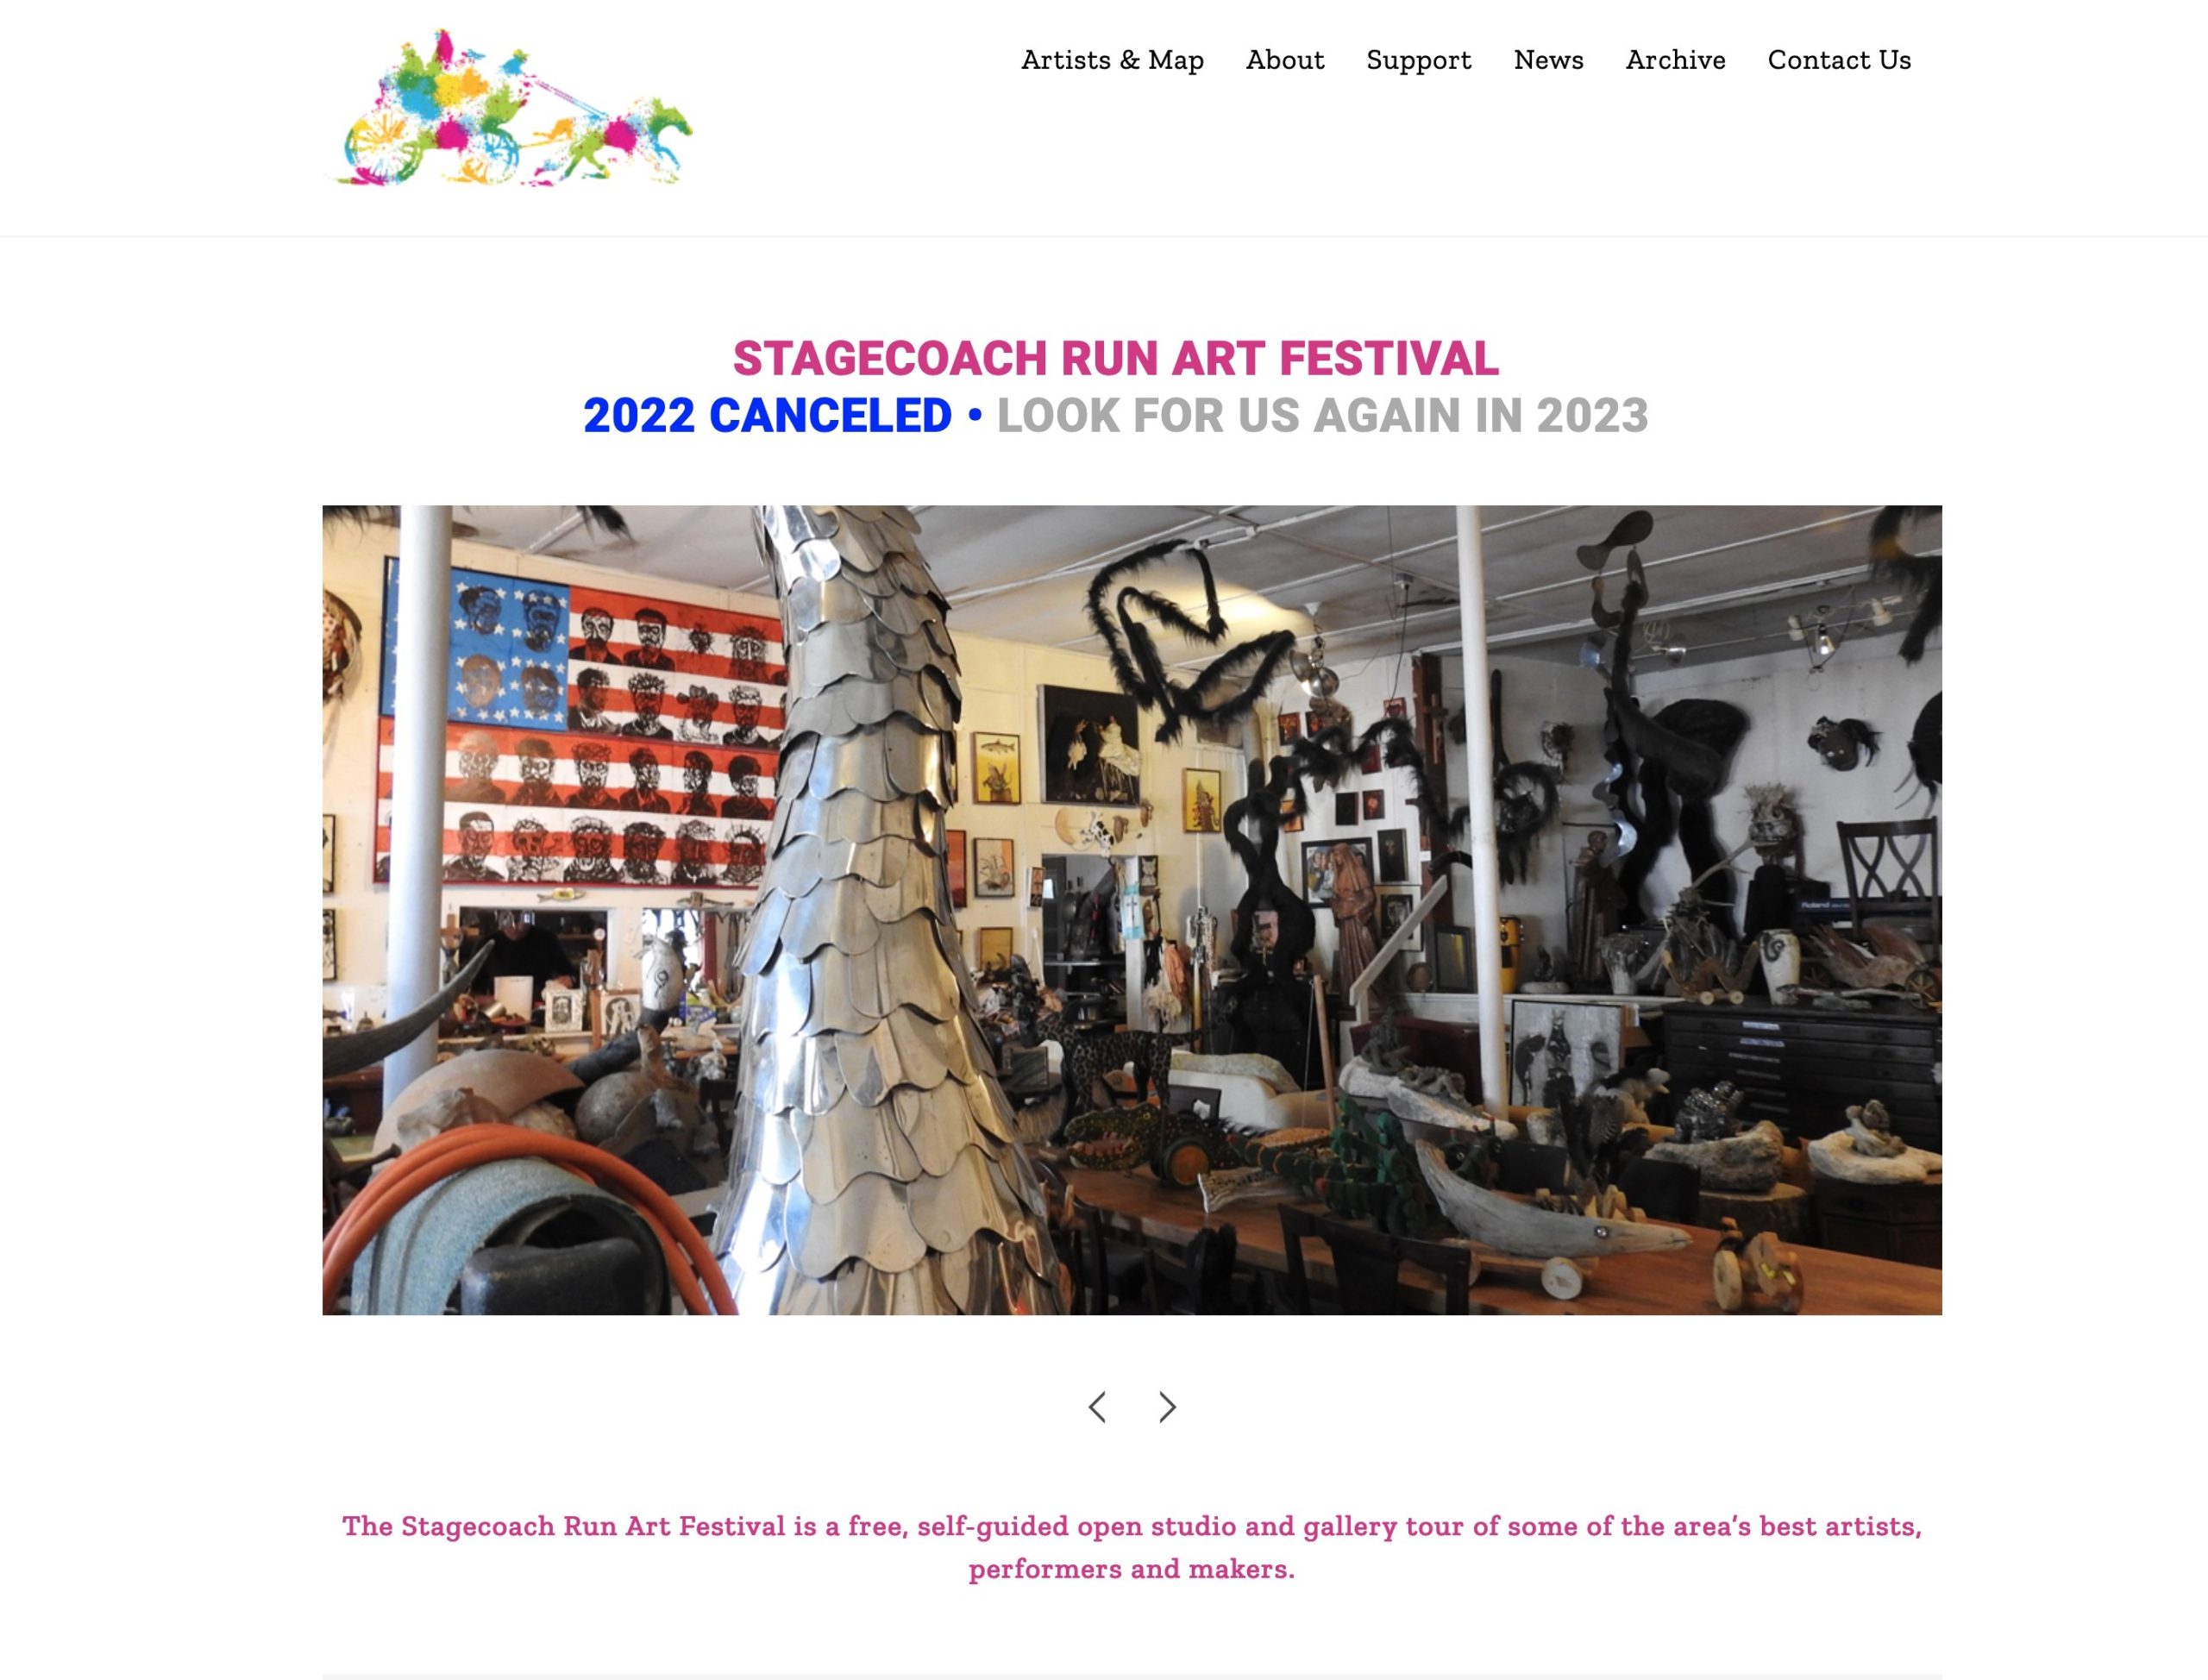 A website for the Stagecoach Run Art Festival in Treadwell and Franklin NY.
Visit website stagecoachrun.com